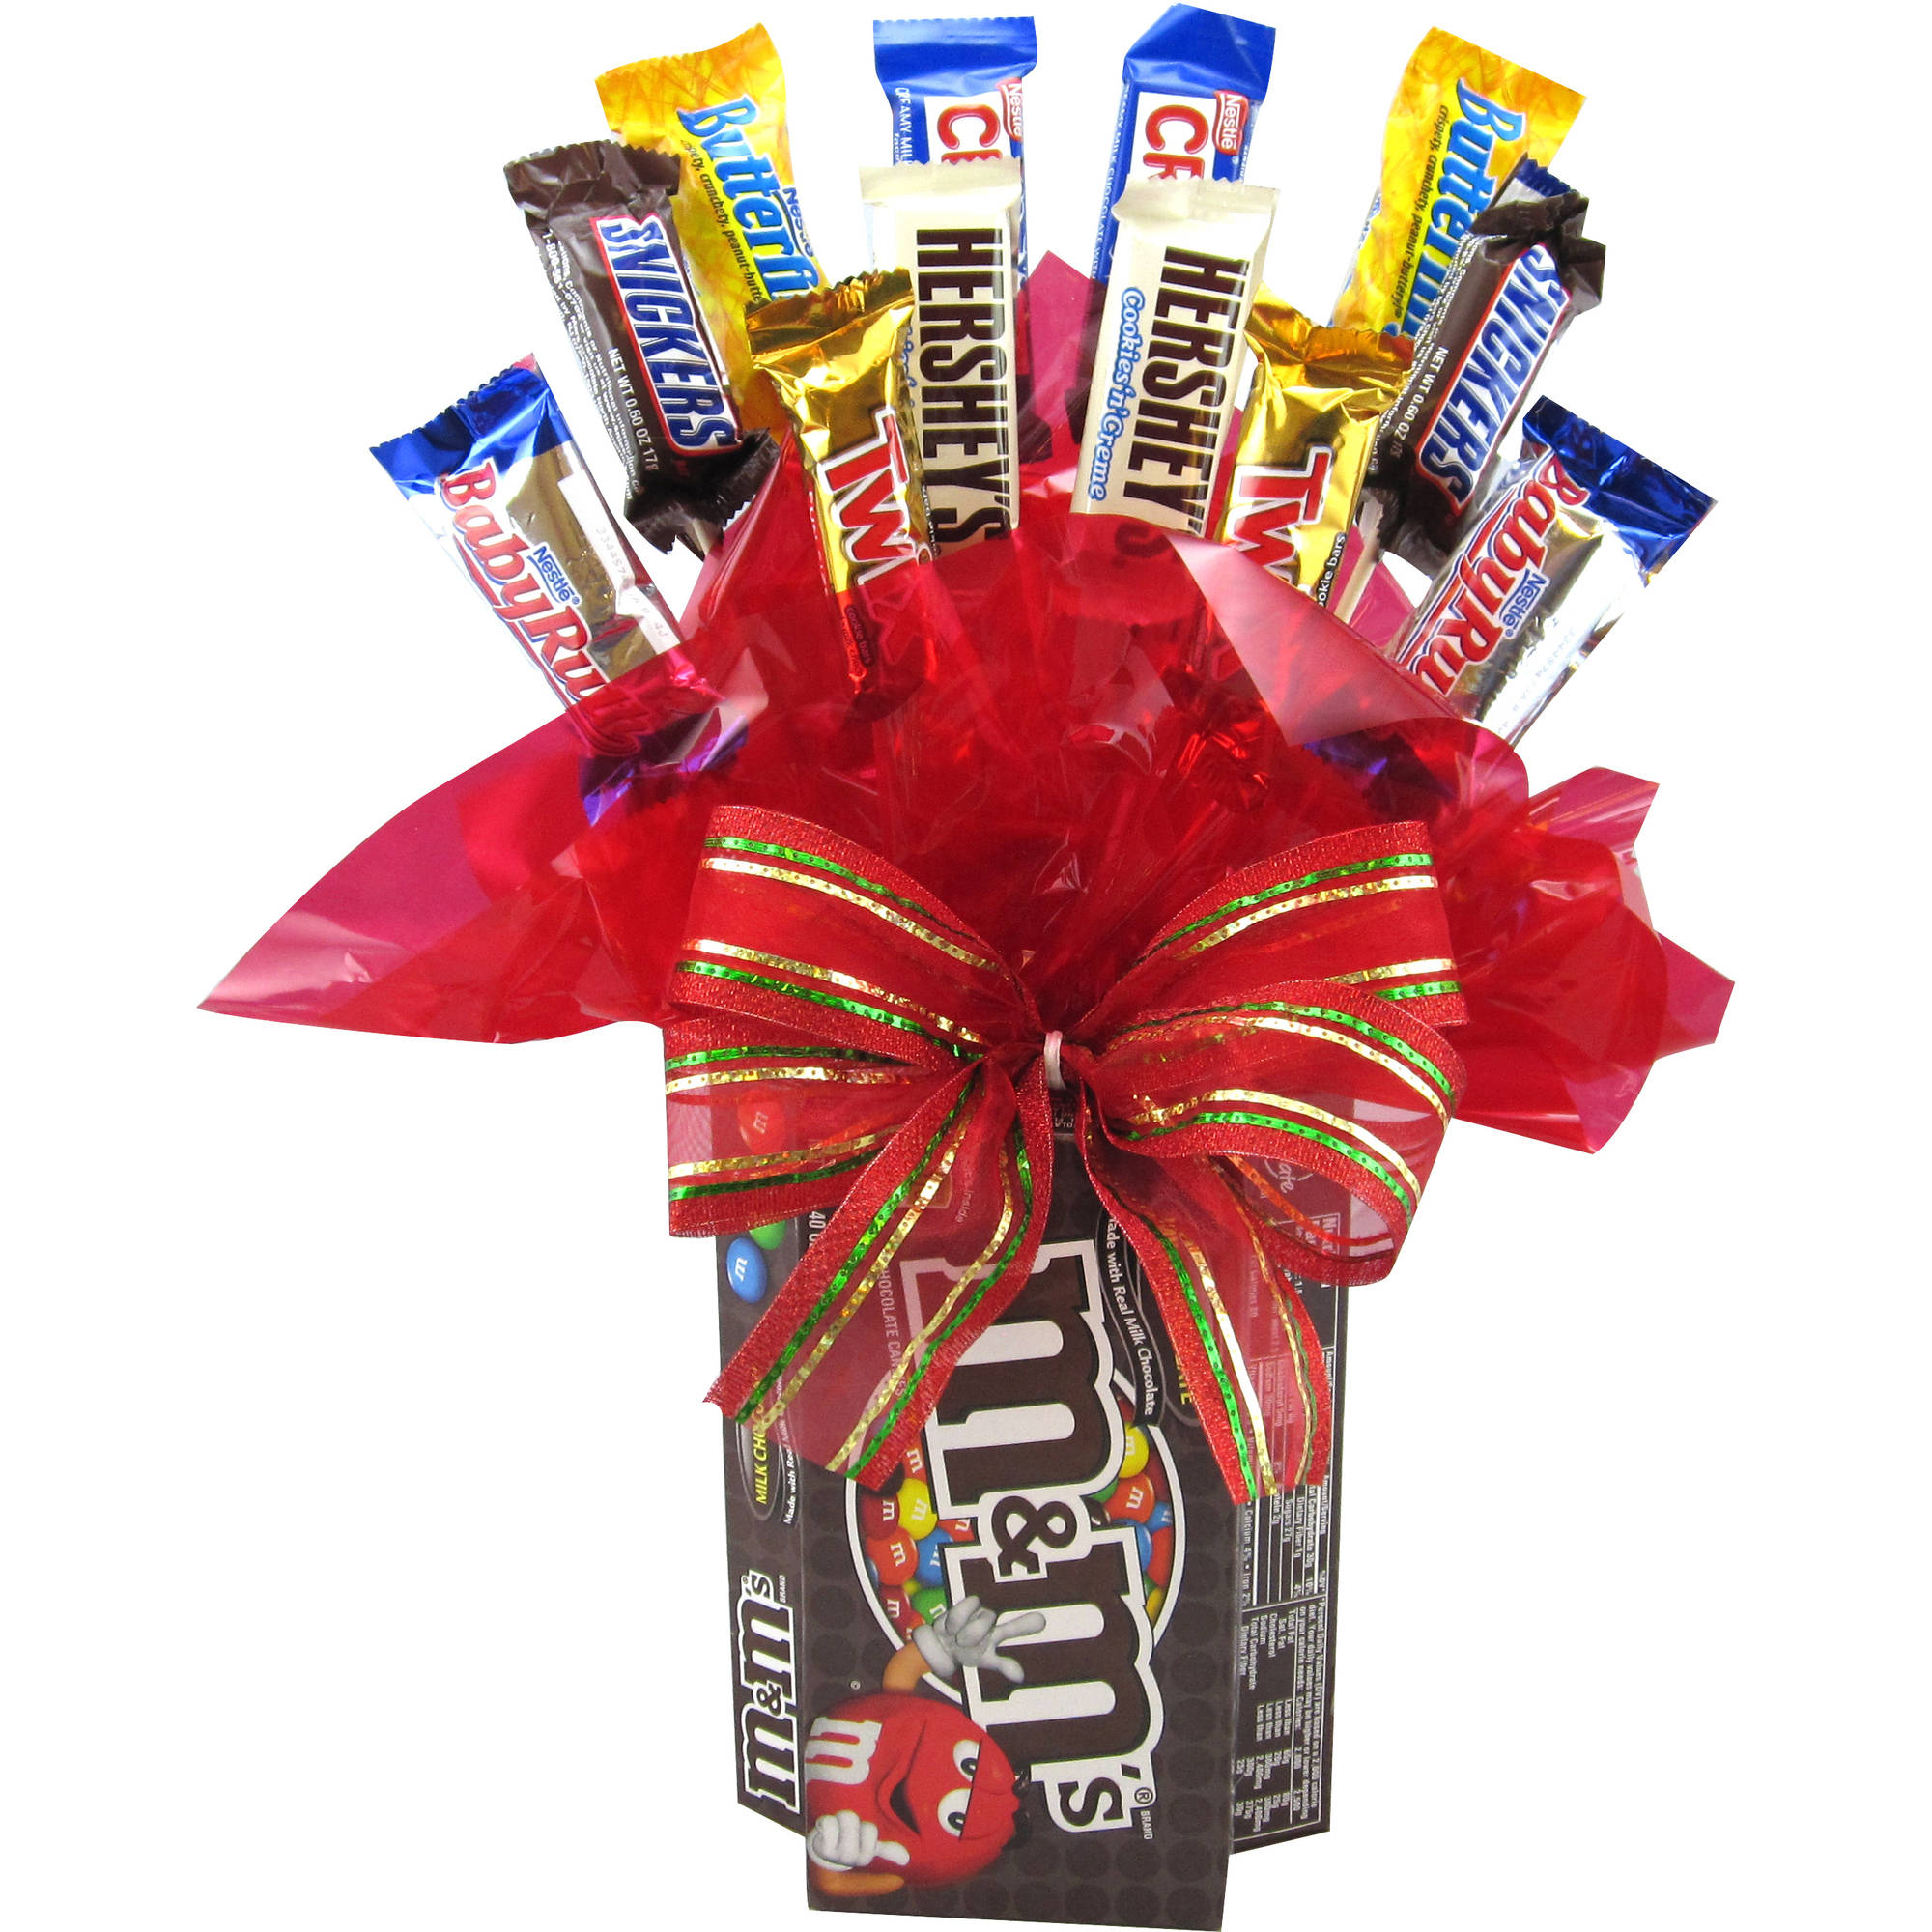 Candyblossoms M&M'S Assorted Candy Holiday Gift Basket, 15 pc - image 1 of 1